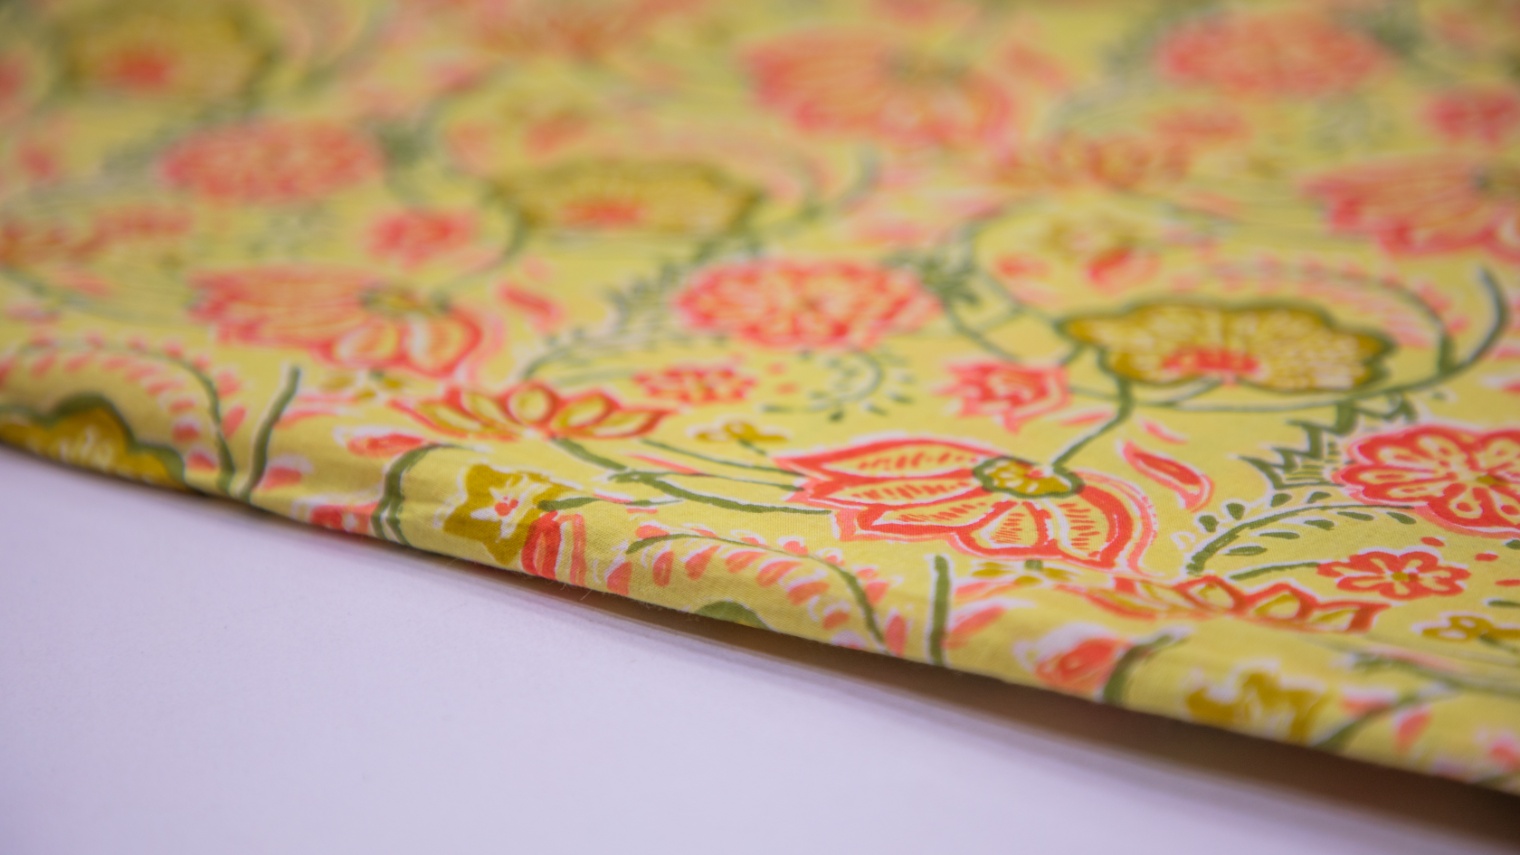 PASTEL LIME YELLOW COLOR COTTON SCREEN PRINT JAIPURI FLORAL JAAL PATTERN FABRIC - 5749